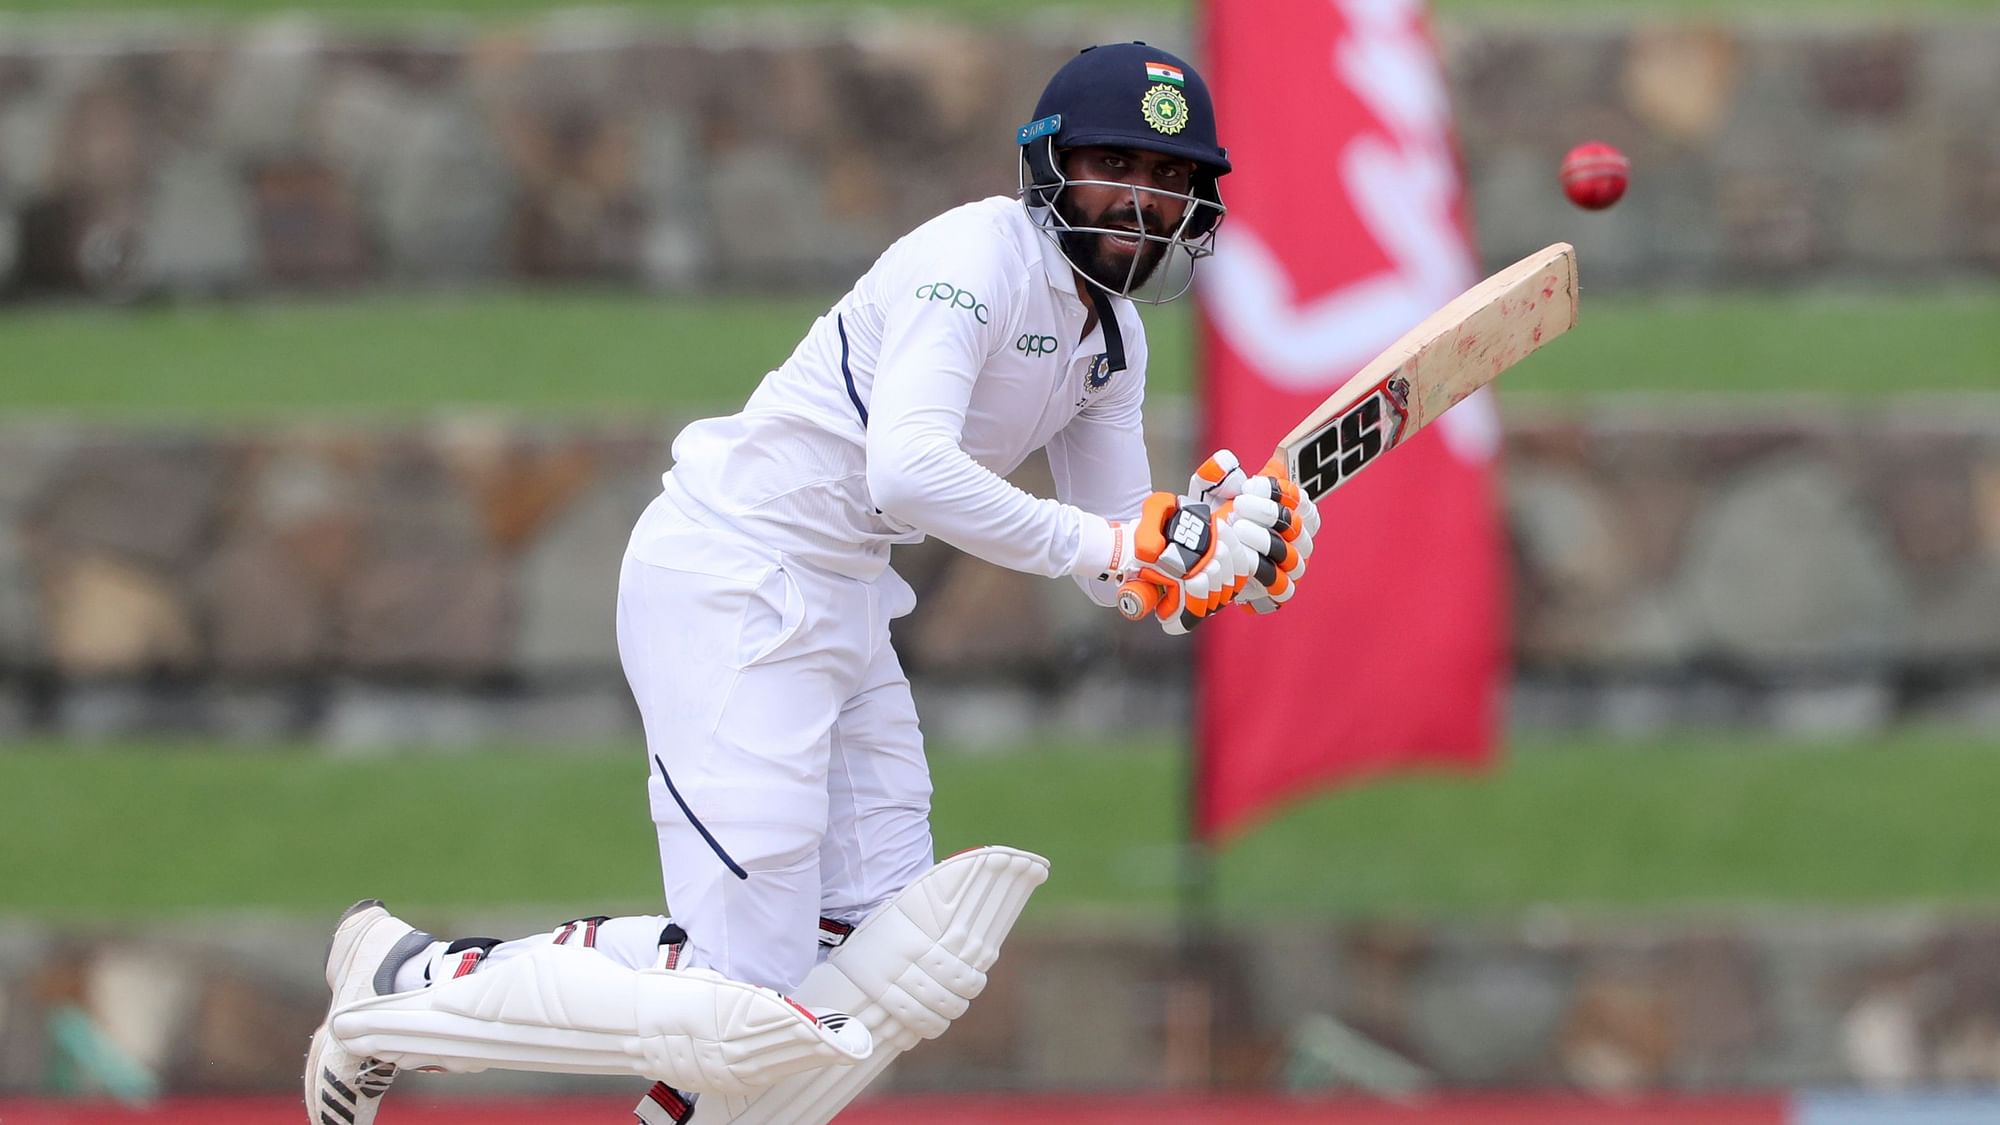 Ravindra Jadeja batted well with the tail to bring up his 11th Test fifty before he was dismissed for 58.